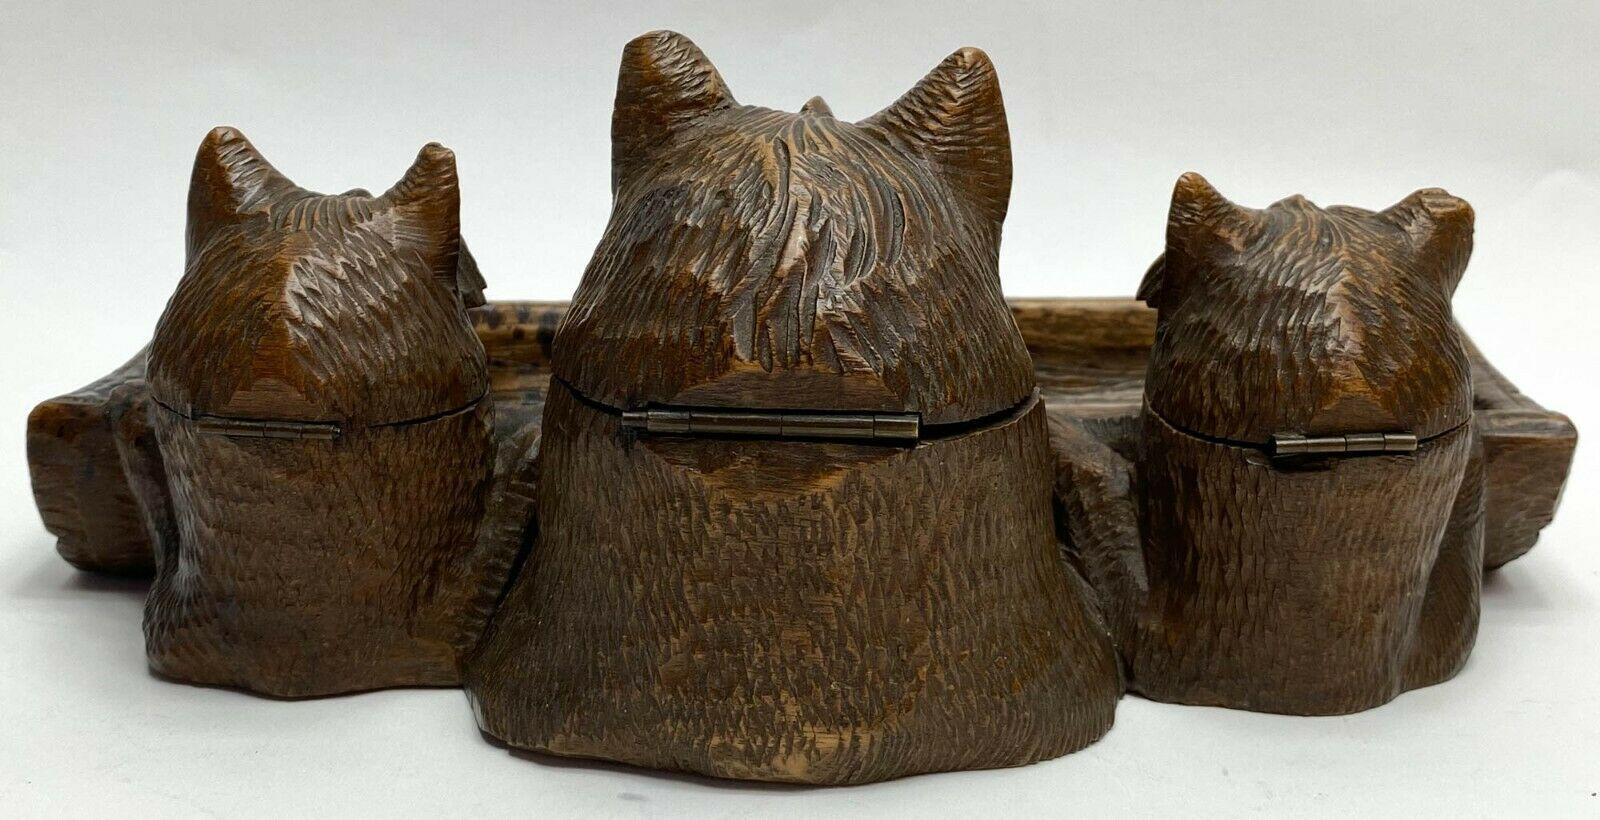 Hand carved wood terrier dog pen tray ink well ink stand Early 20th century

Hand carved figural dog, possibly terrier breed, ink stand with modeled two ink holders and one nib holder. Probably American or German.

Additional